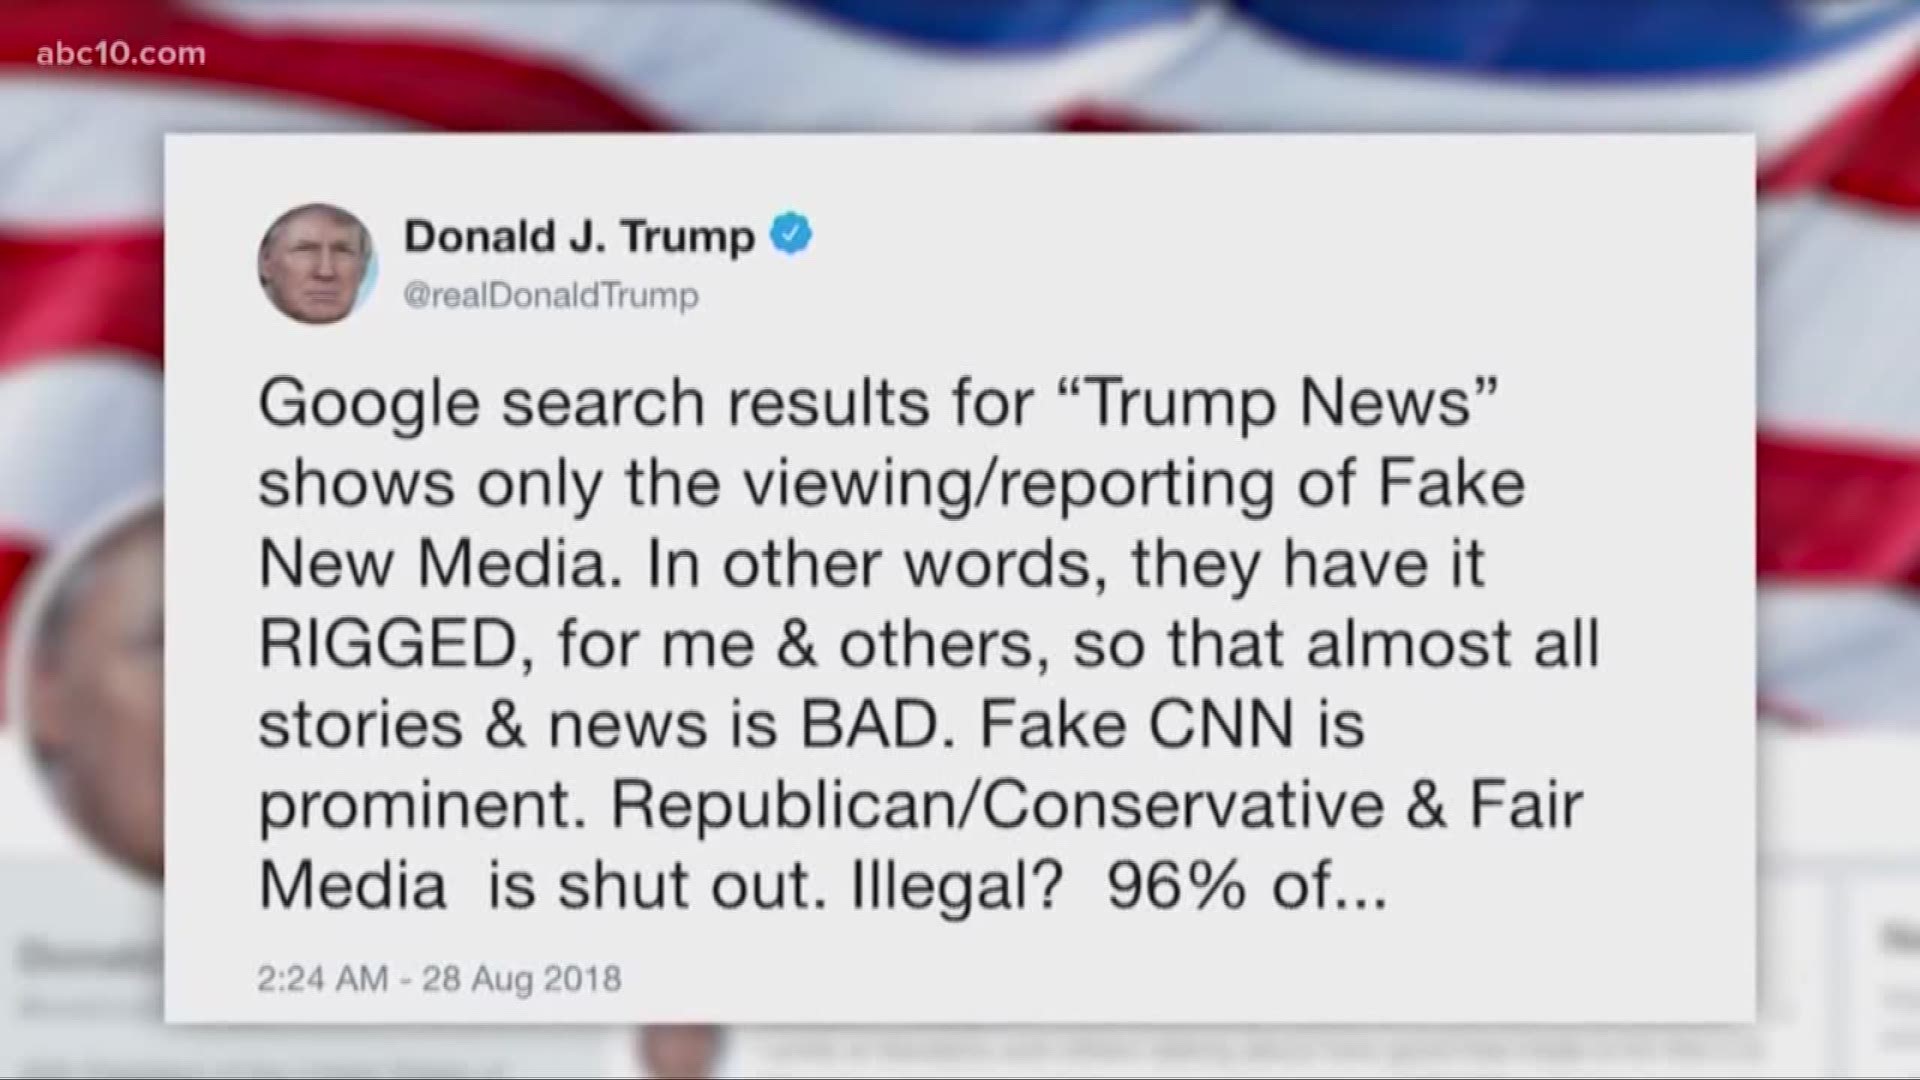 You probably heard about President Trump latest target on Twitter. Earlier he tweeted "Google search results for Trump news shows only the viewing/reporting of fake news media." So, that got us thinking, how does Google search results really work? Let's c